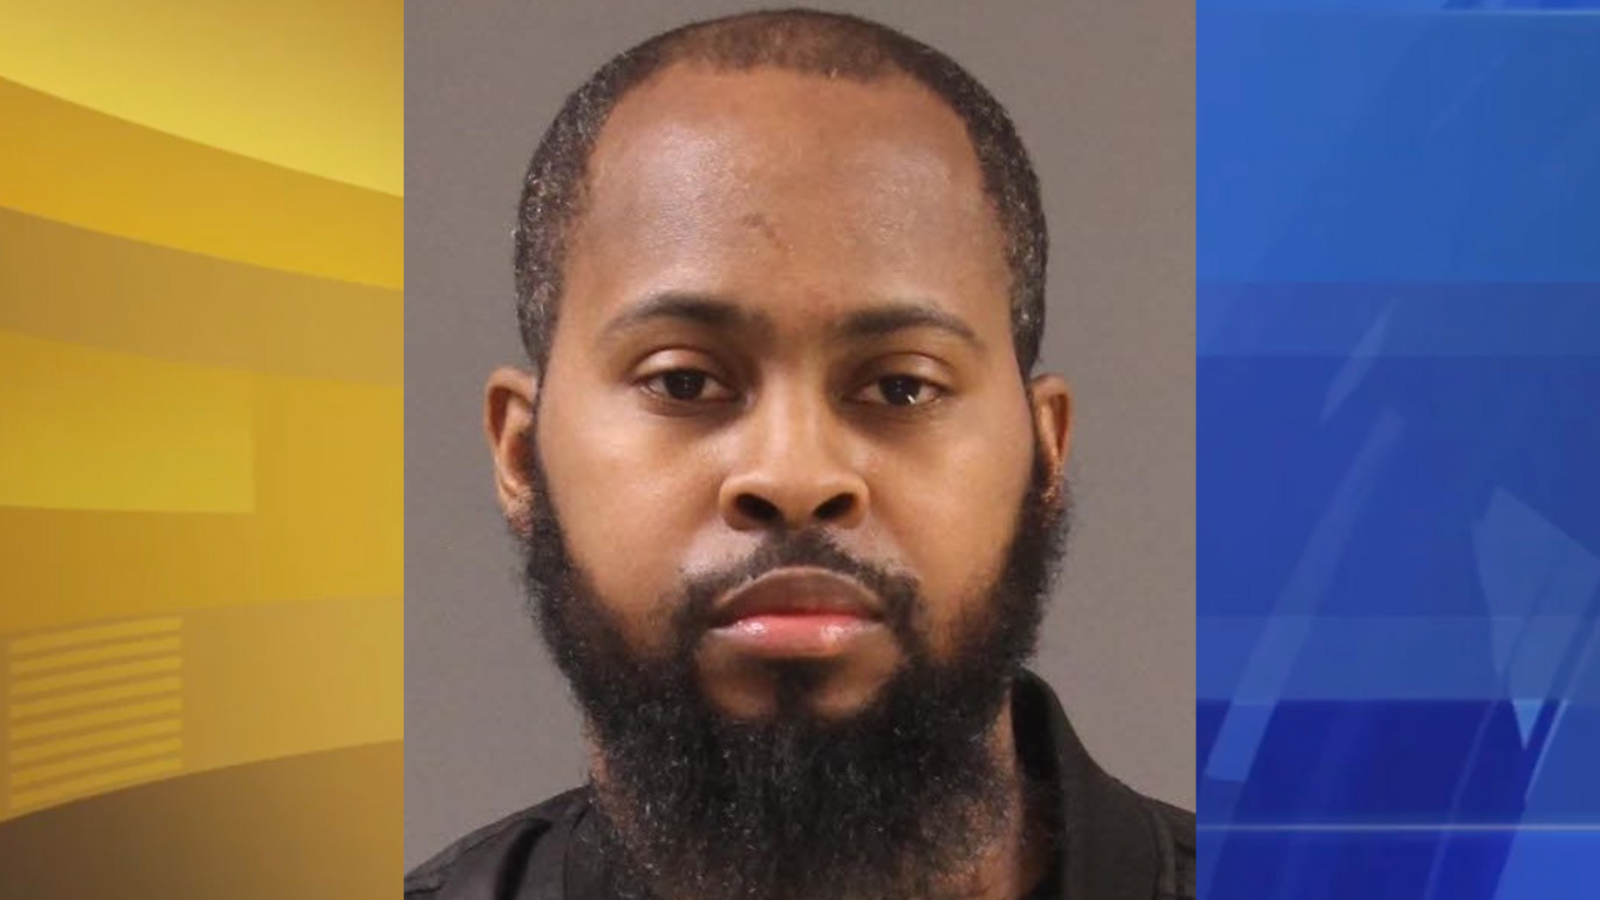 Philadelphia police identify suspected DUI driver who hit officer following traffic stop